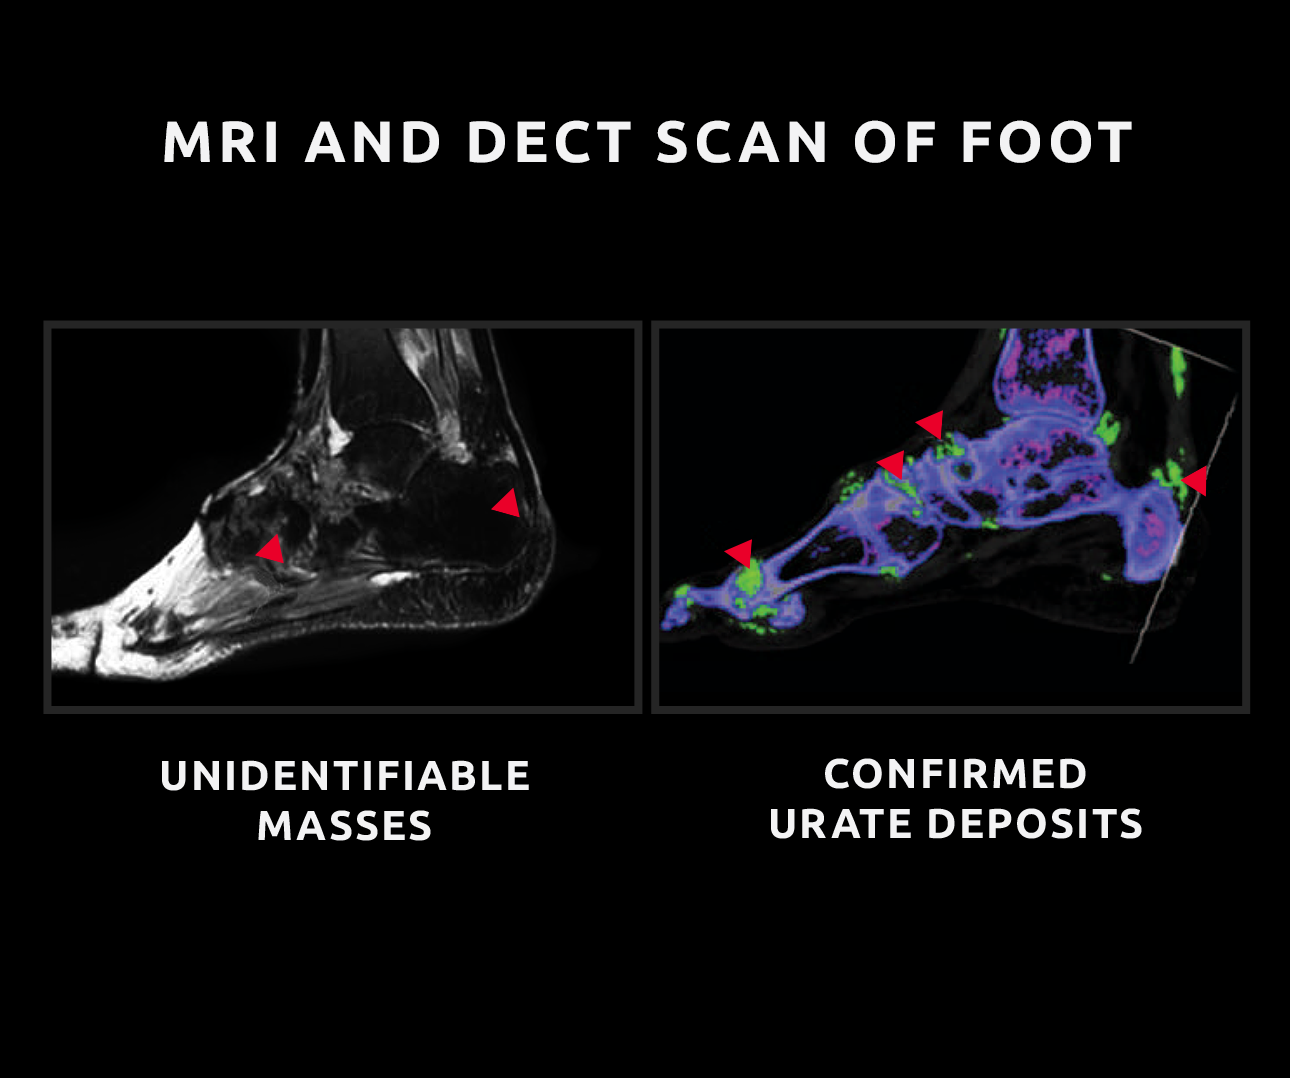 Image comparing MRI and DECT scans of foot for the detection of gouty tophi